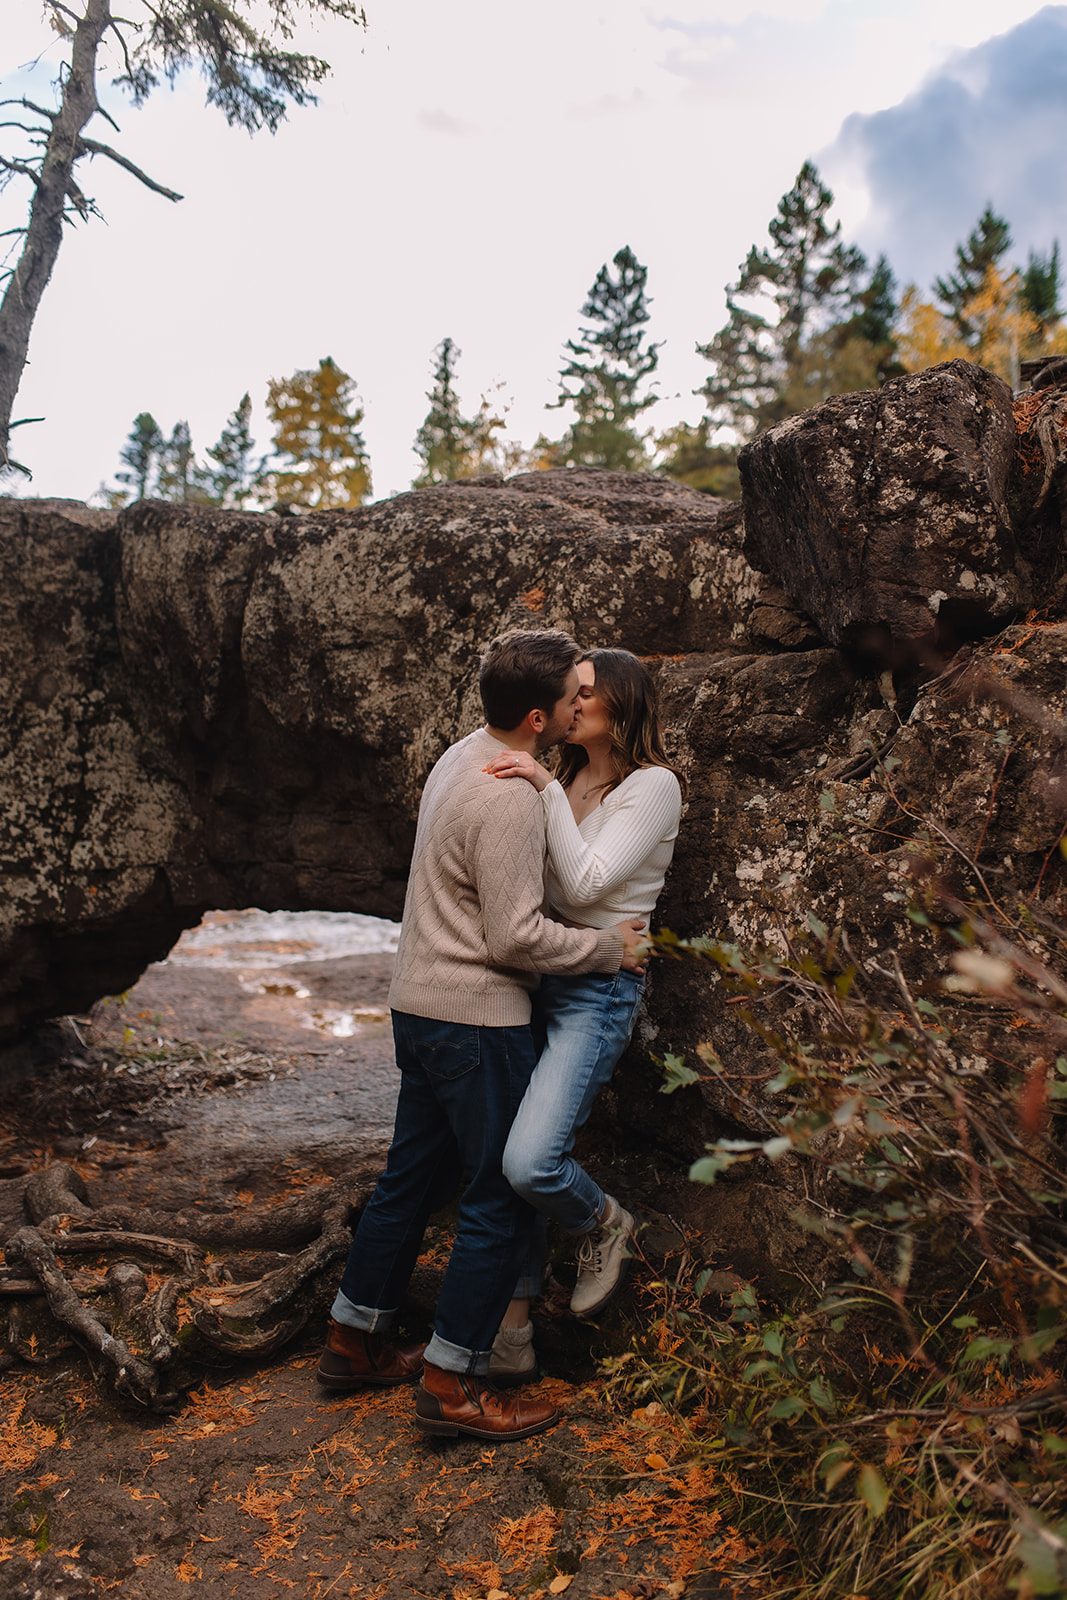 An engagement couple kissing each other tenderly at Gooseberry falls state park in Minnesota